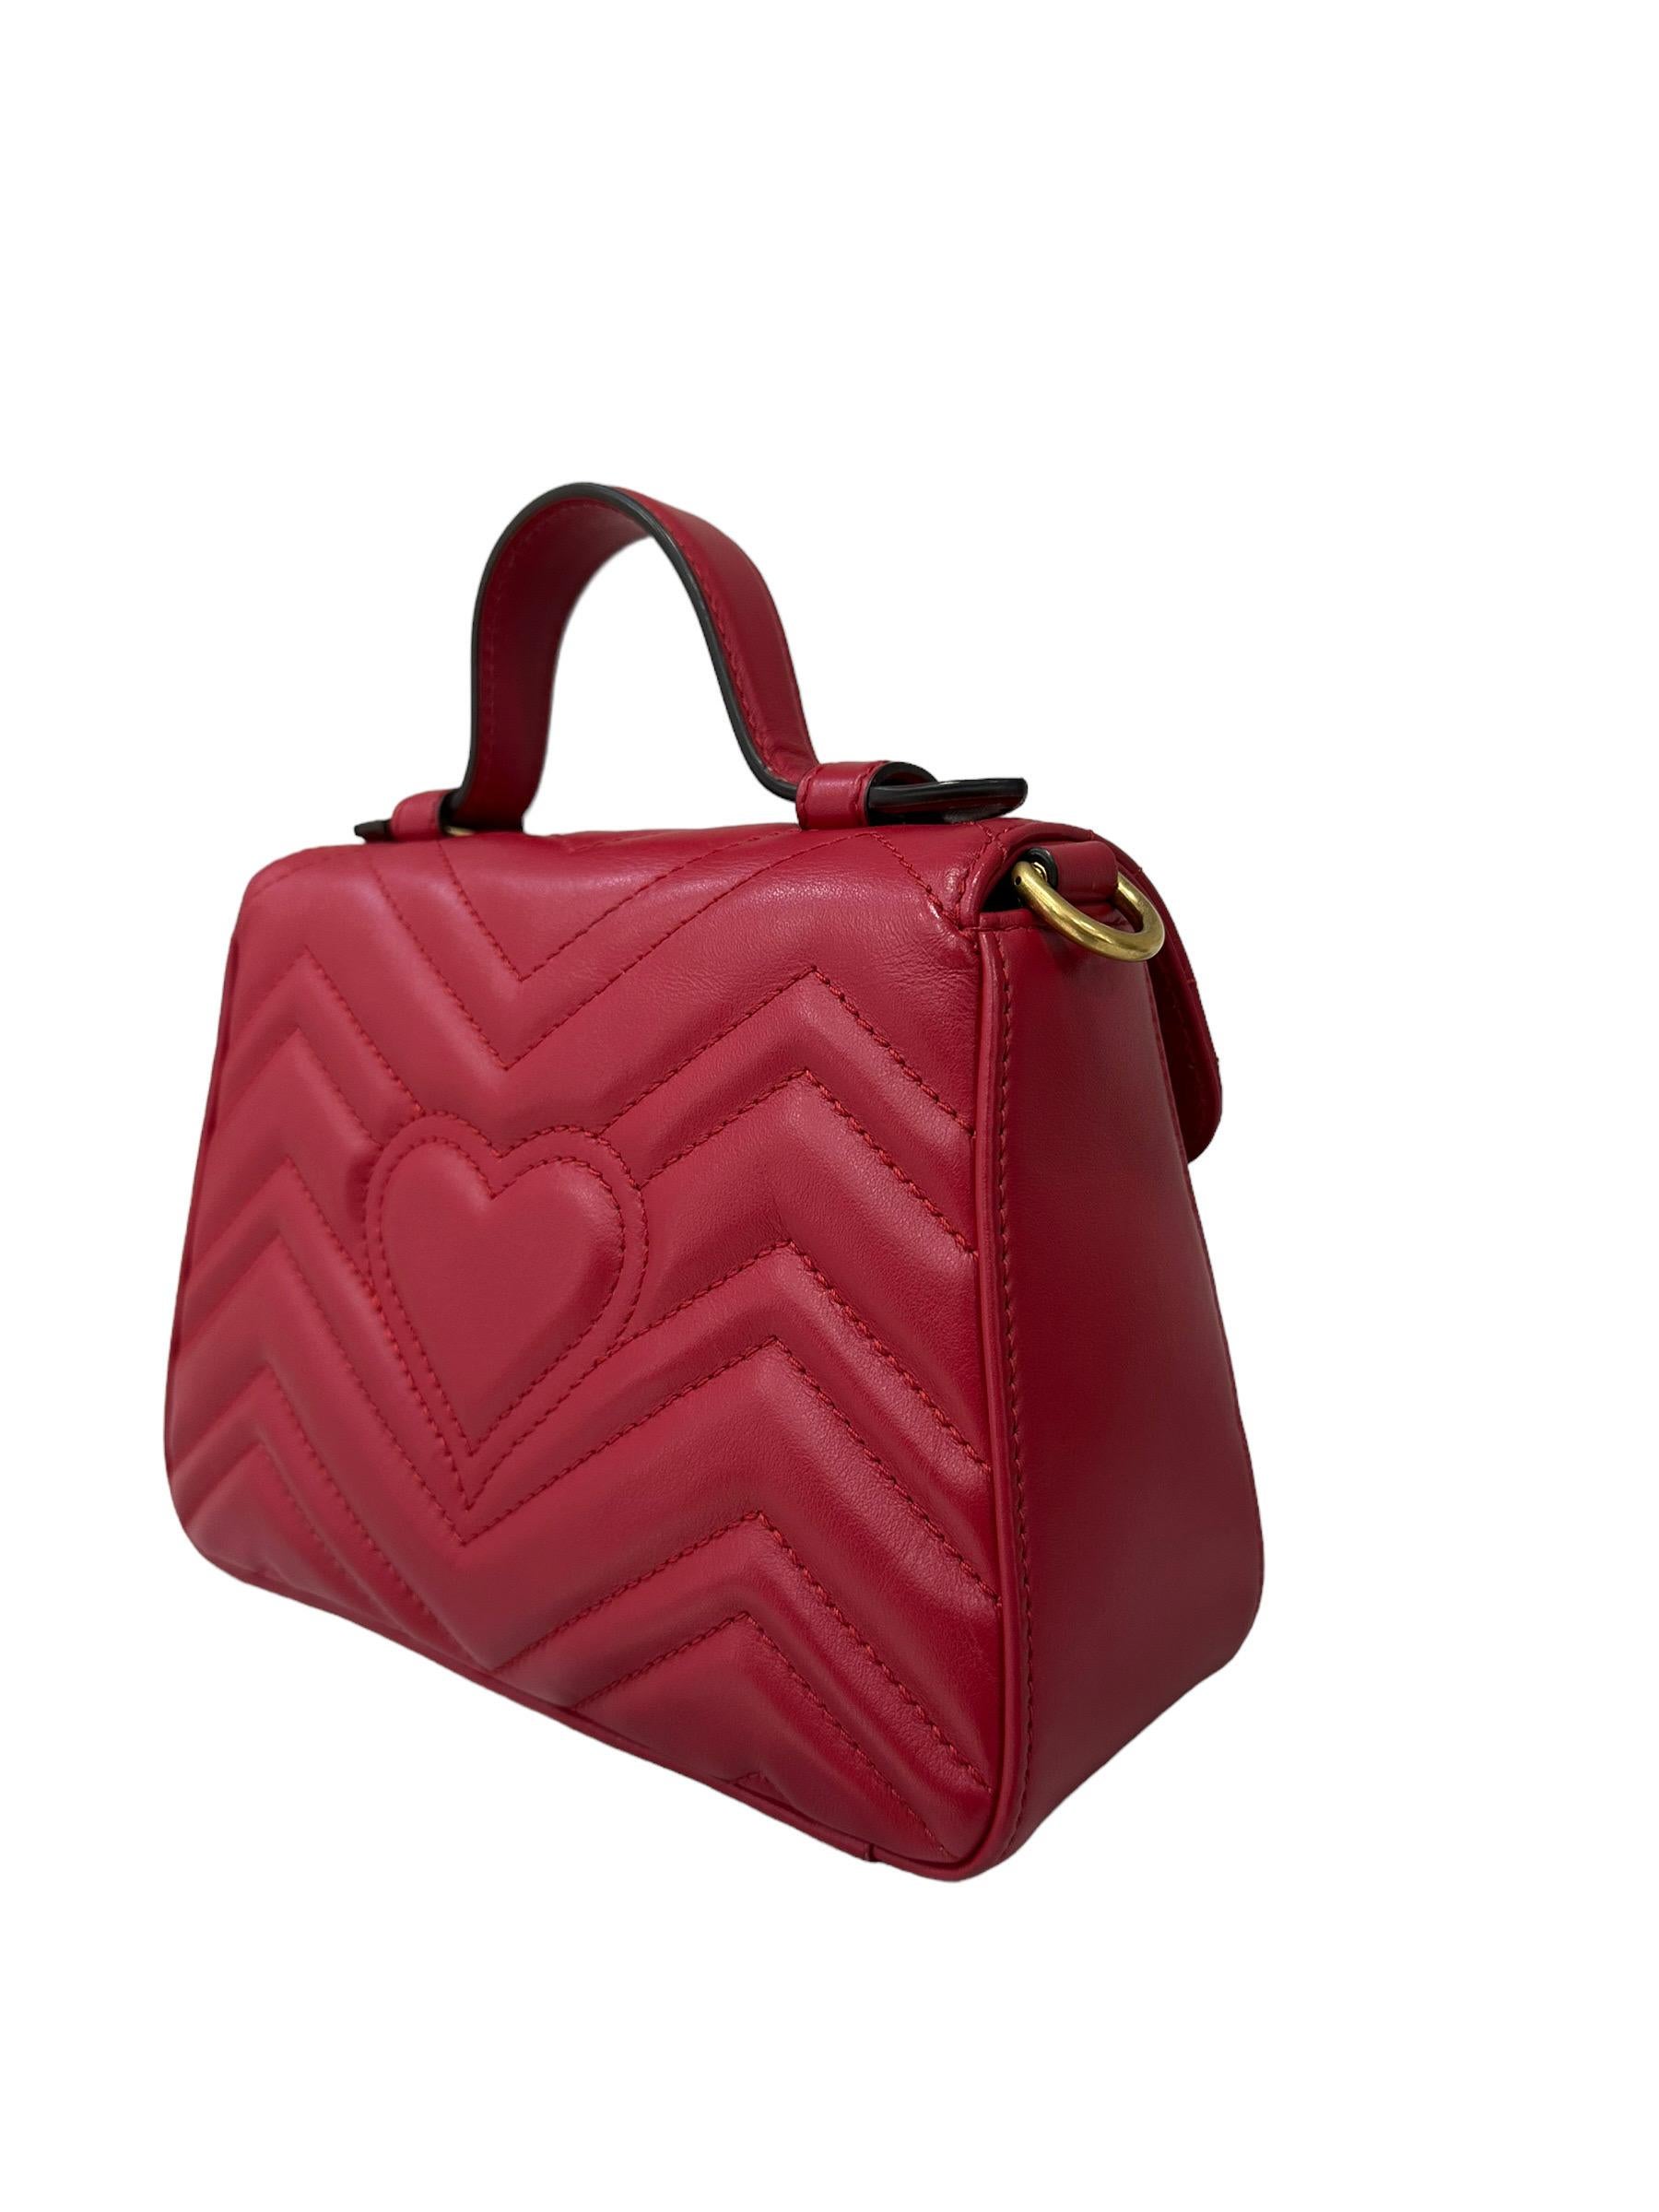 Gucci Marmont 20 Handle Rossa 6